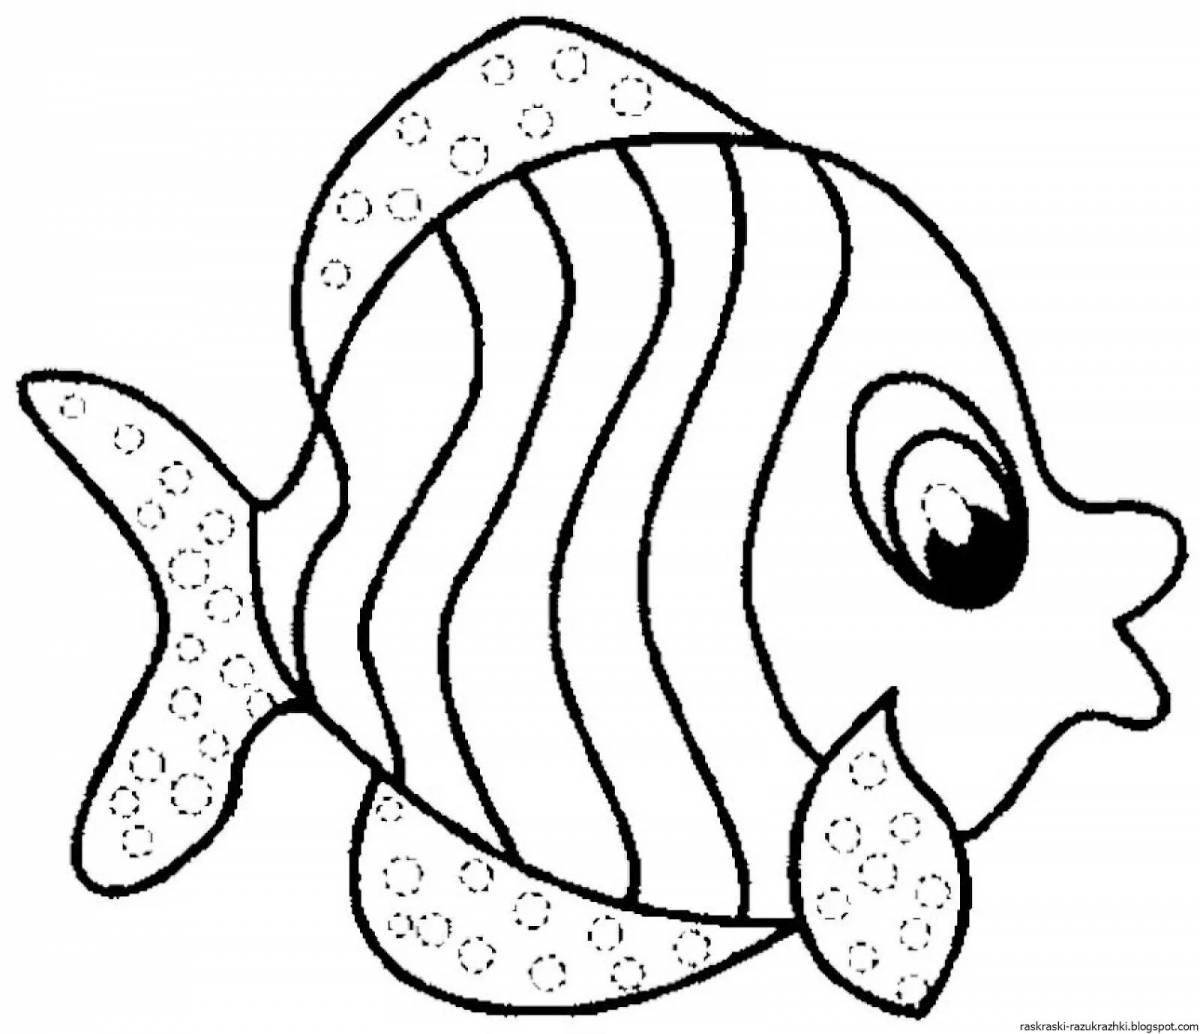 Fish pattern for kids #3